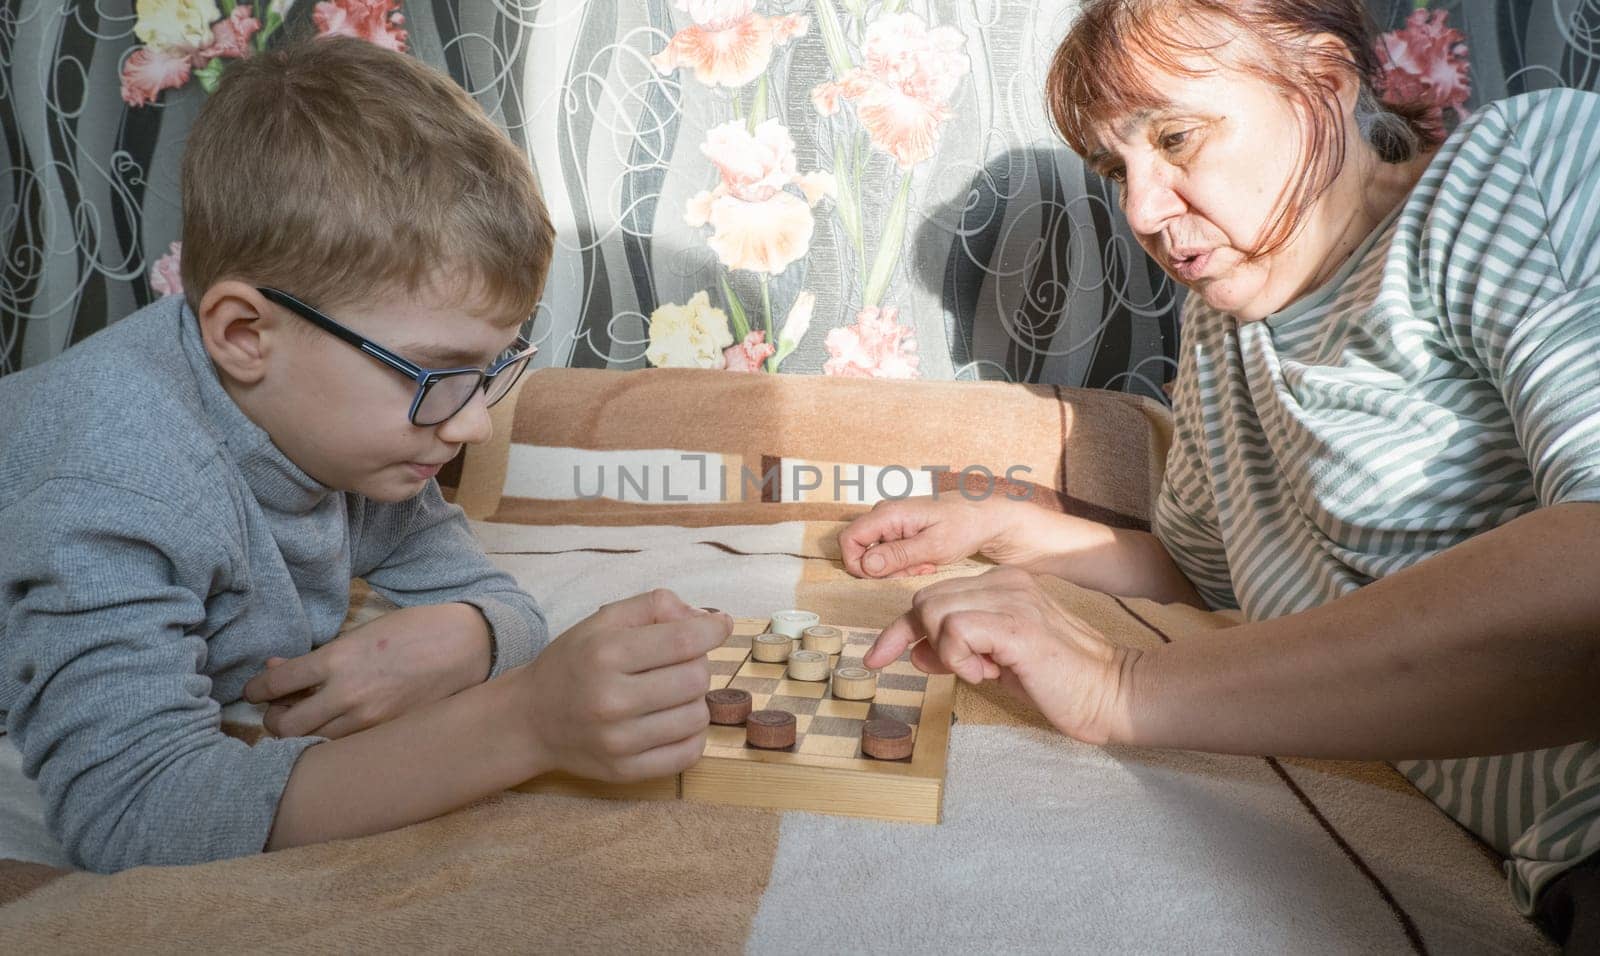 A caring middle-aged grandmother plays checkers with a child, a boy, lying on the bed. Happy family enjoying an interesting wooden board game at home. by Ekaterina34